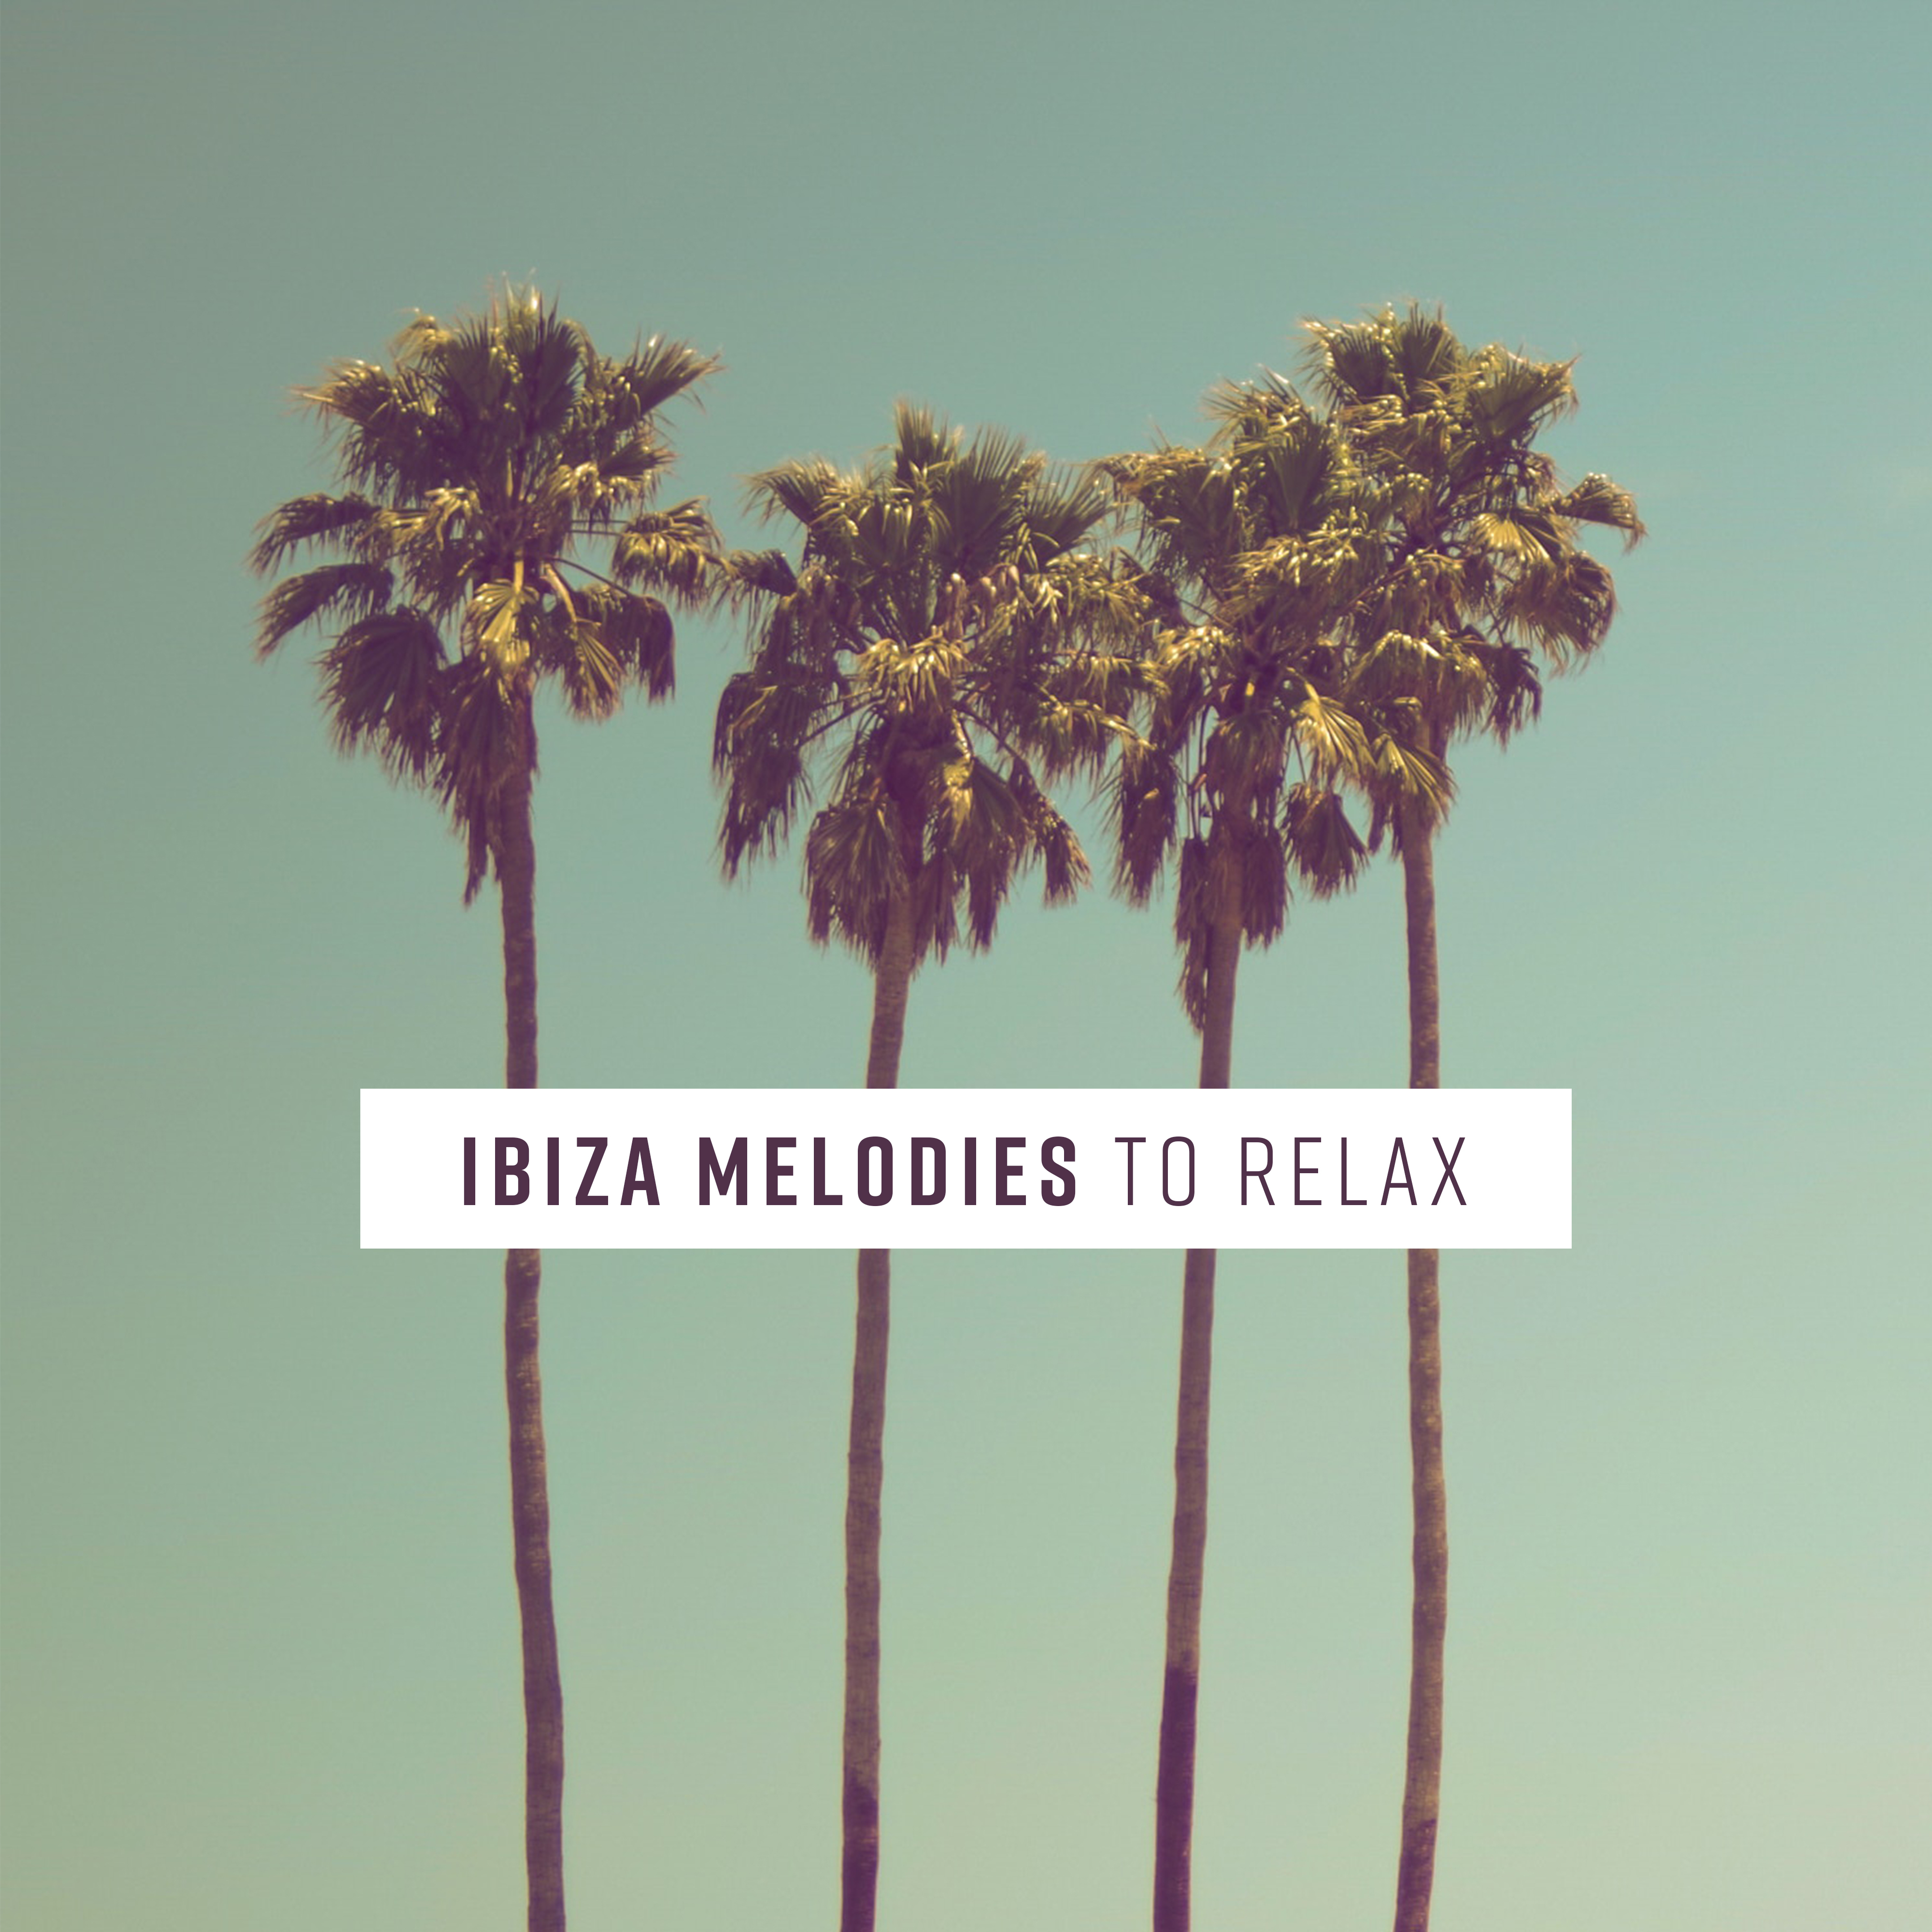 Ibiza Melodies to Relax